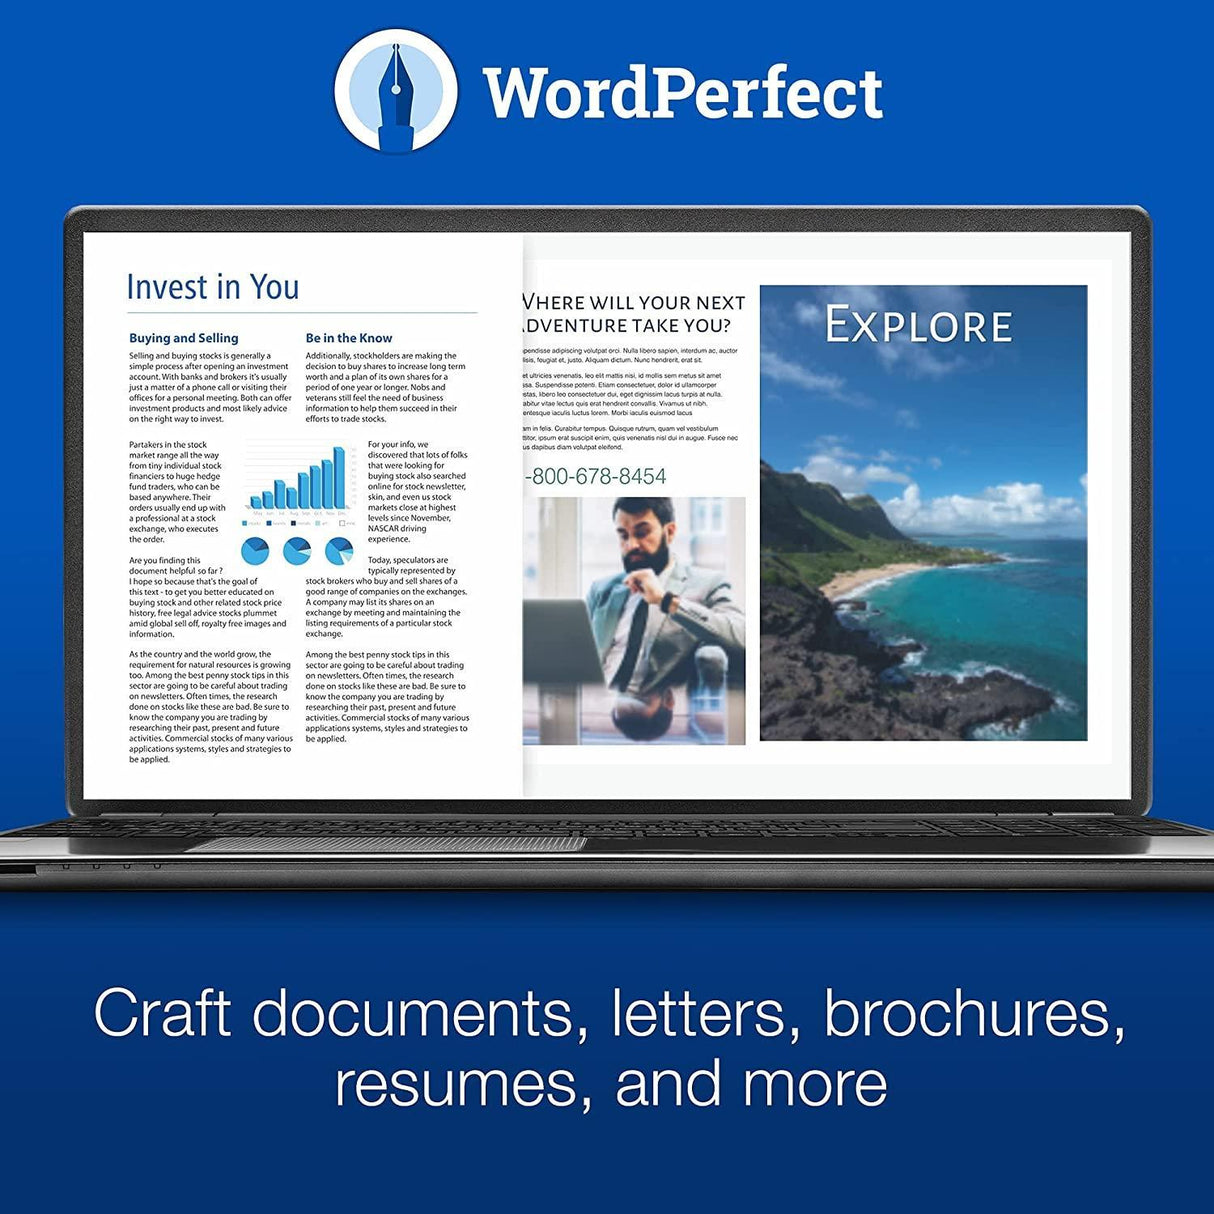 Corel WordPerfect Office 2021 Standard - Instant Download for Windows (1 Computer) - SoftwareCW - Authorized Reseller